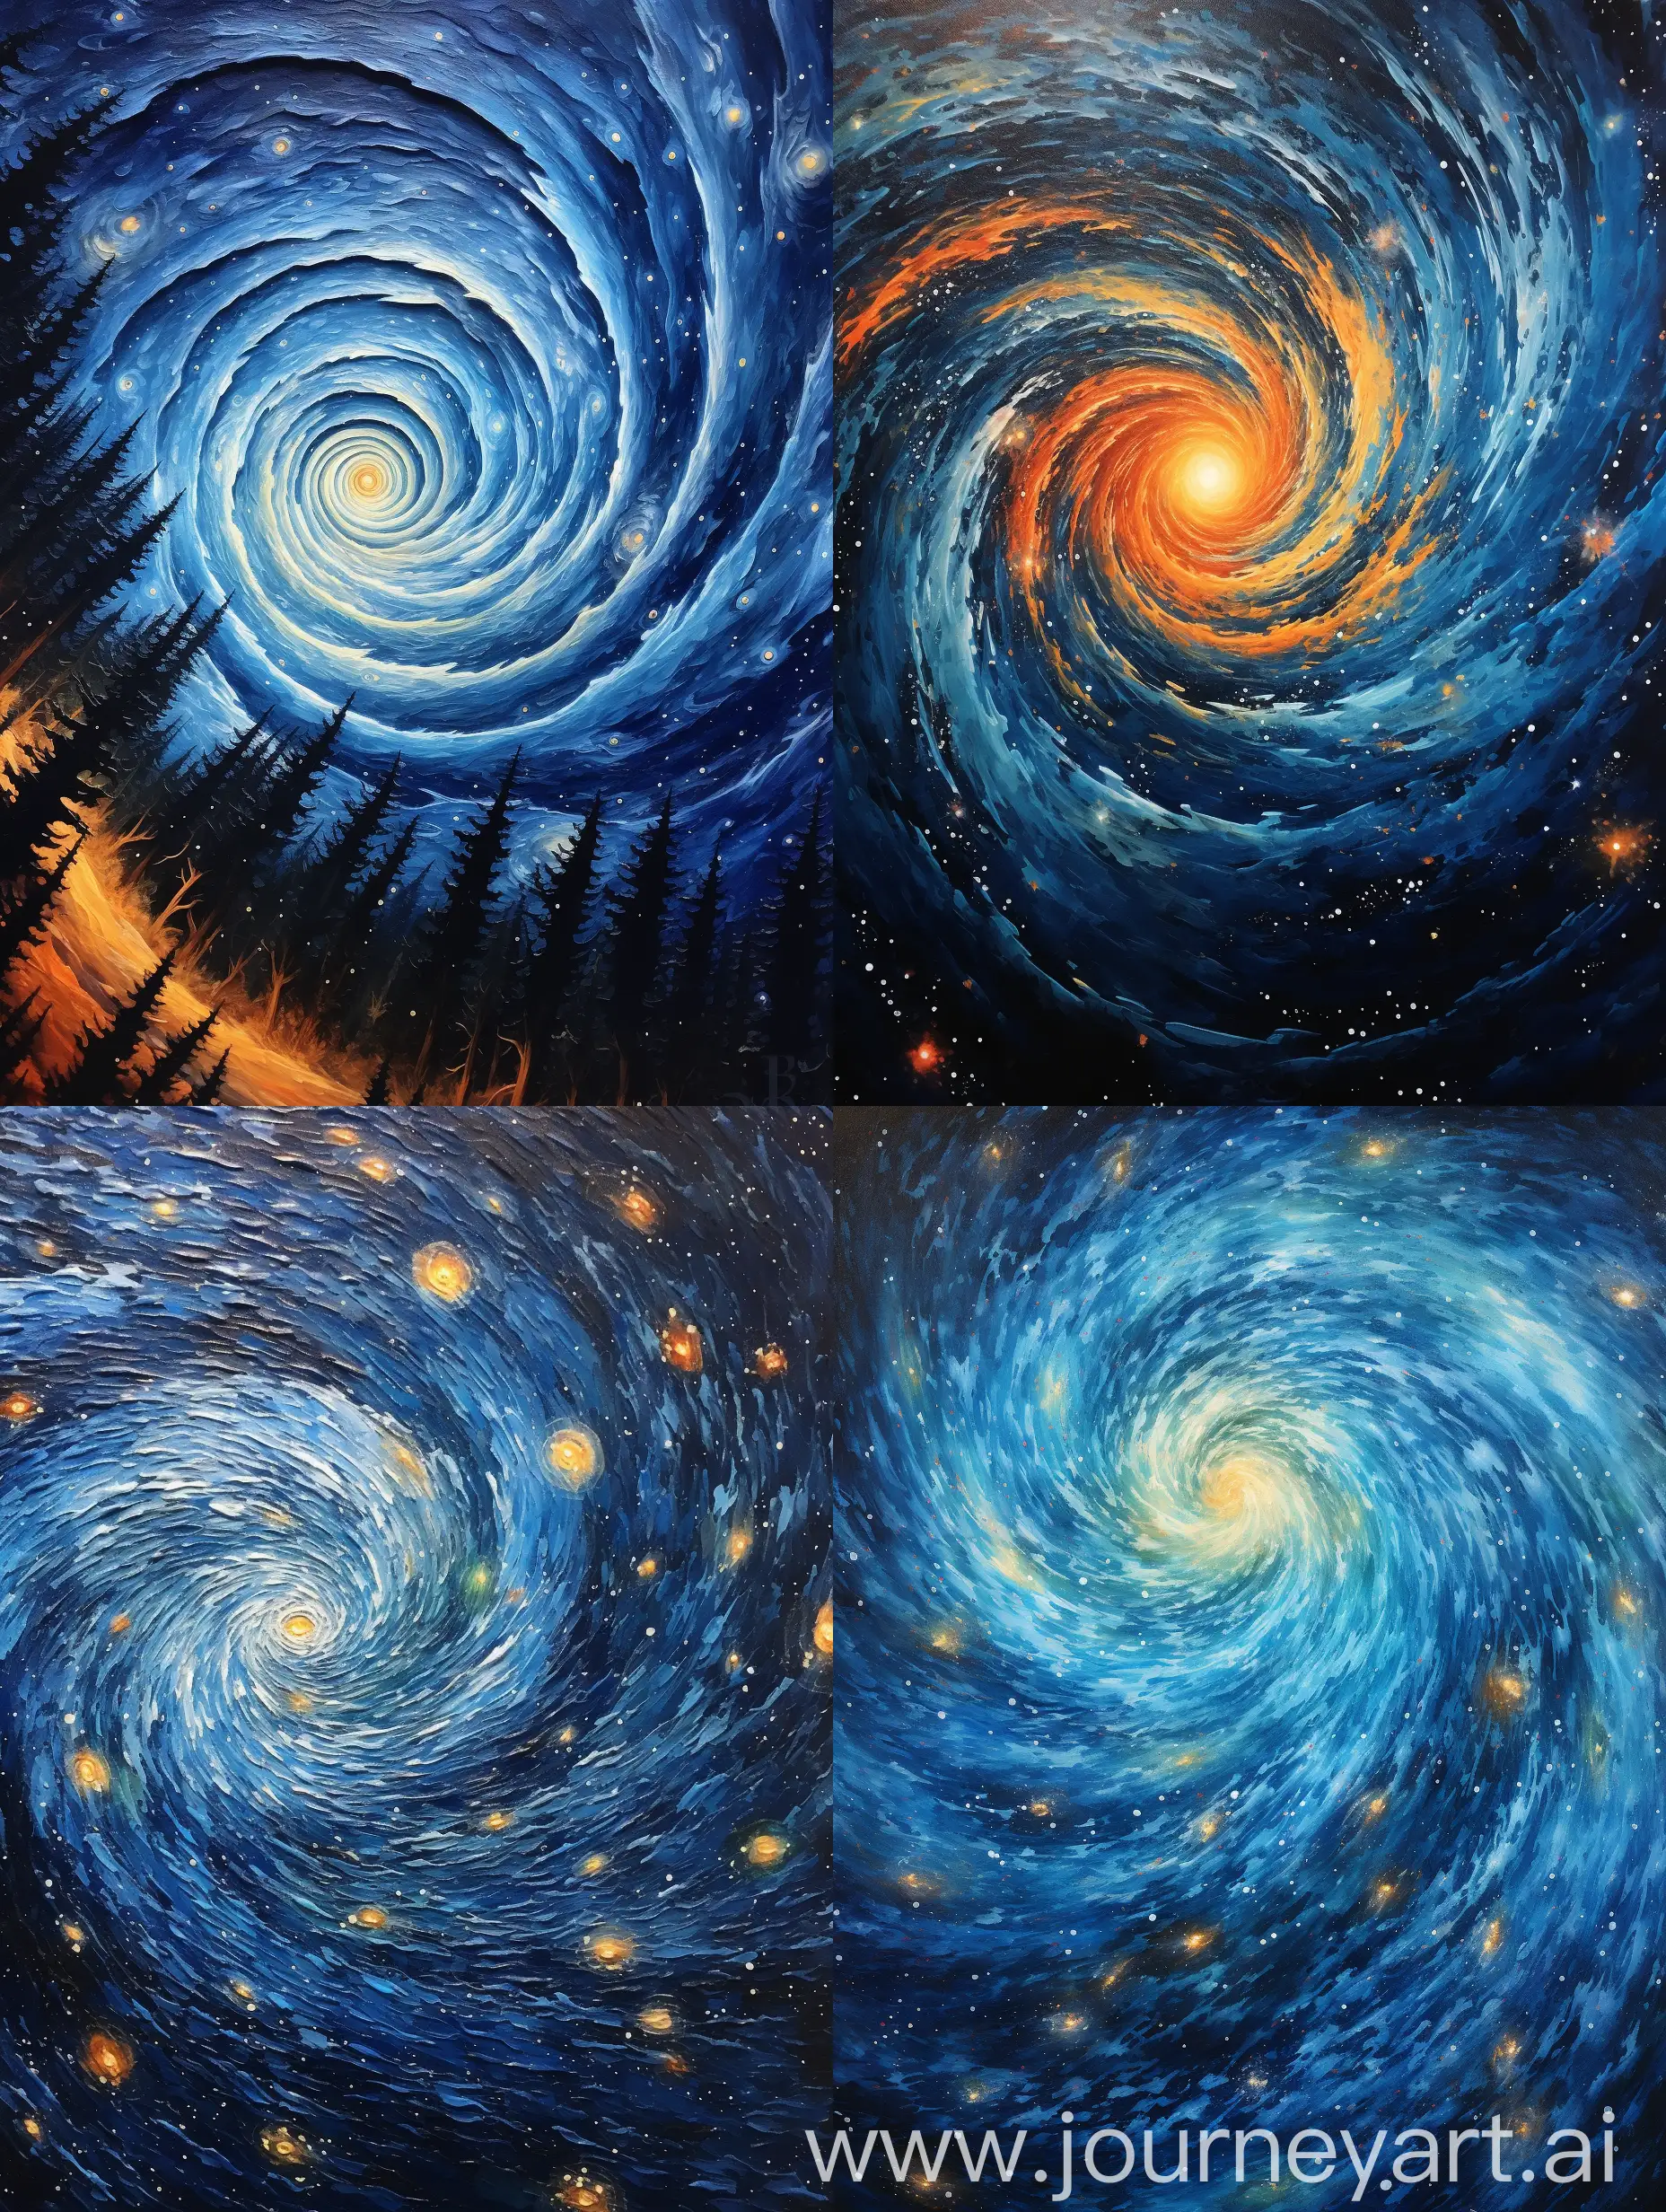 Spiraling-Galaxy-Fantasy-Celestial-Art-with-Colorful-Mbius-Swirls